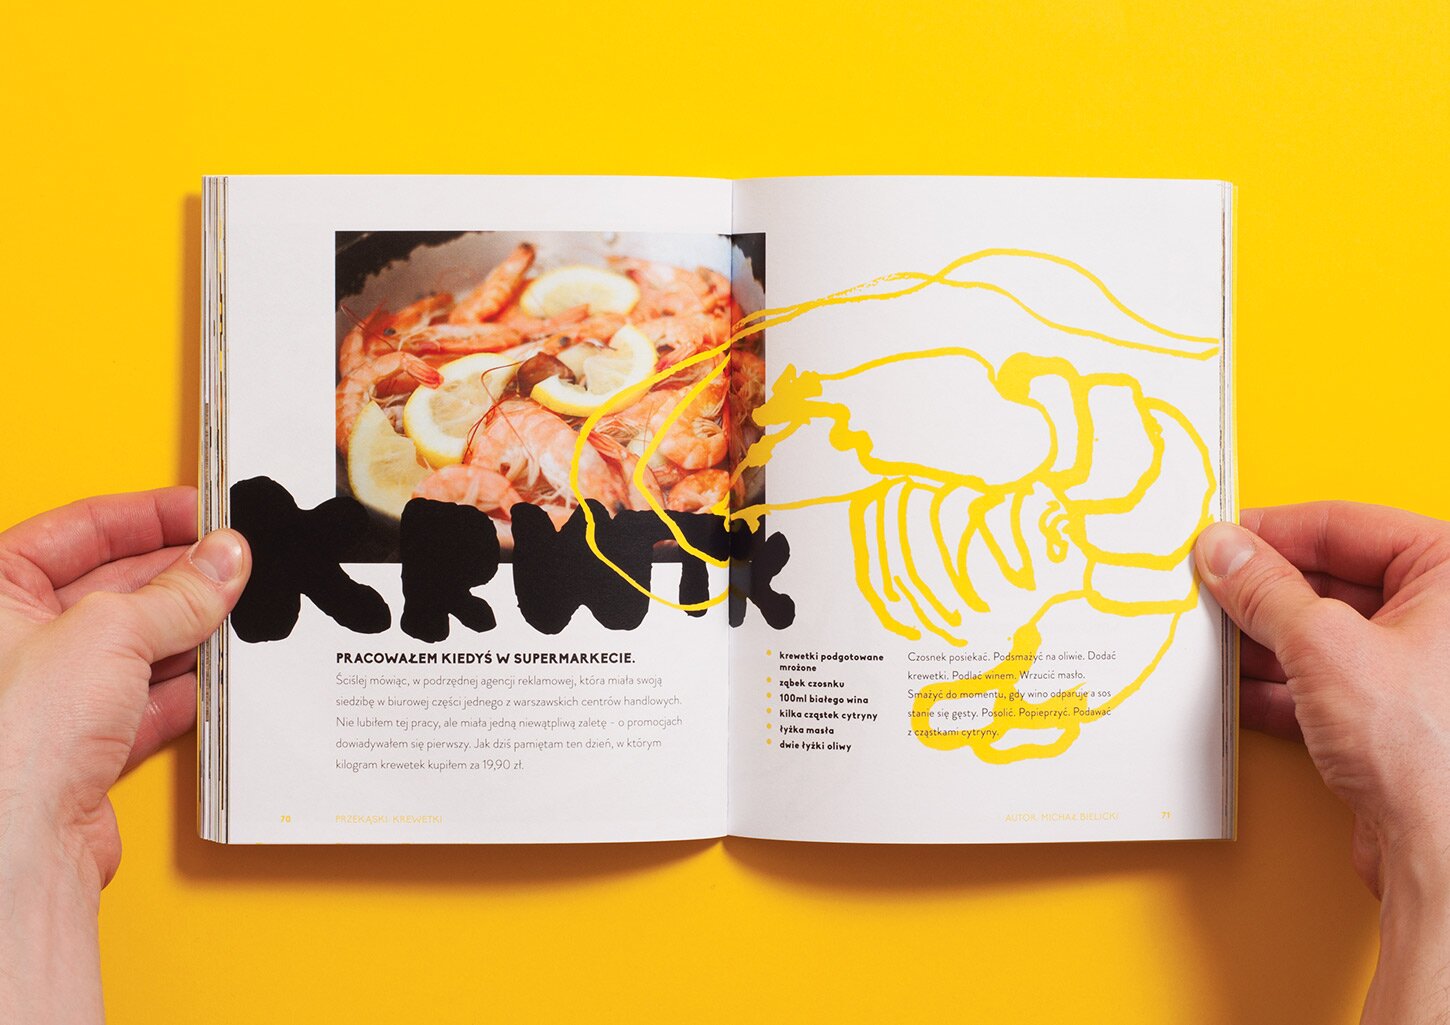 A spread from the UCZTA cookbook with a picture of shrimps